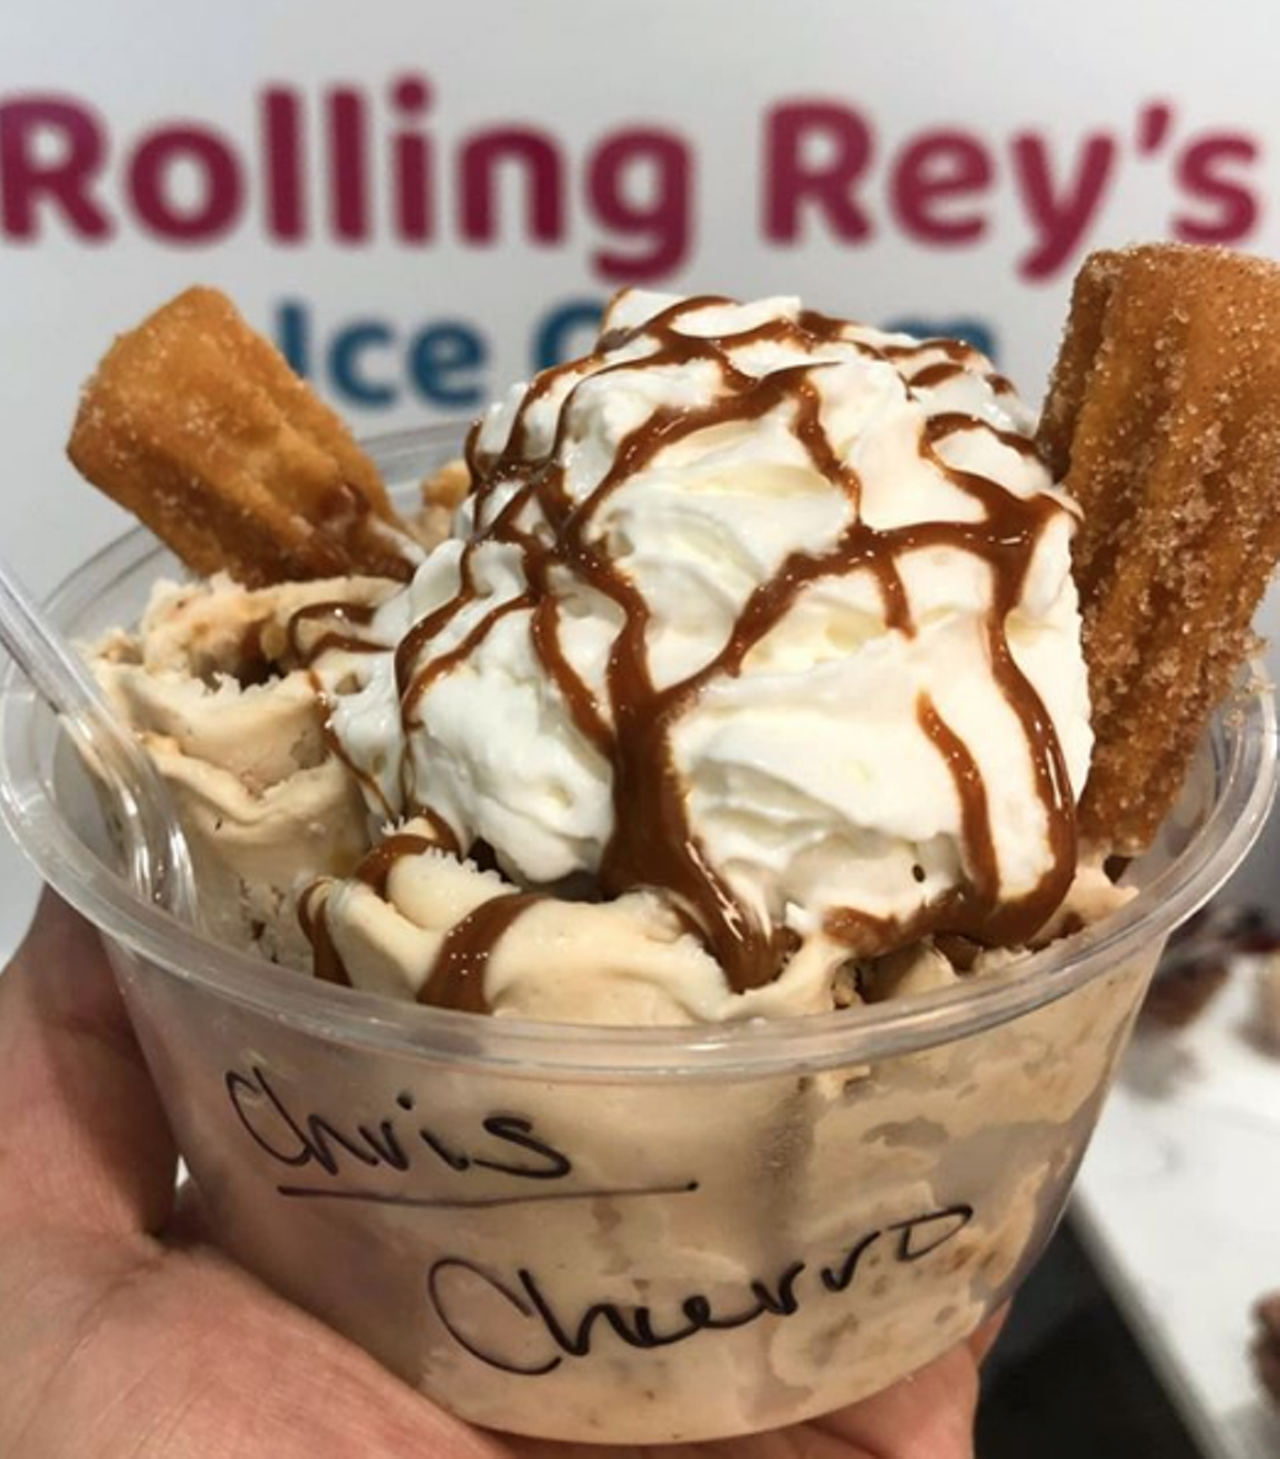 Rolling Rey’s
Multiple locations, rollingreysicecream.com
With locations throughout San Antonio, trust Rolling Rey’s to come through when you want something delicious. The Thai-style rolled ice cream is puro in every sense, with SA flavors like mangonada or gansito. If you want something more traditional, try one of the other pre-made flavors or get the wildcard flavor of the month.
Photo by @aymijo210 via Instagram / rollingreyssa